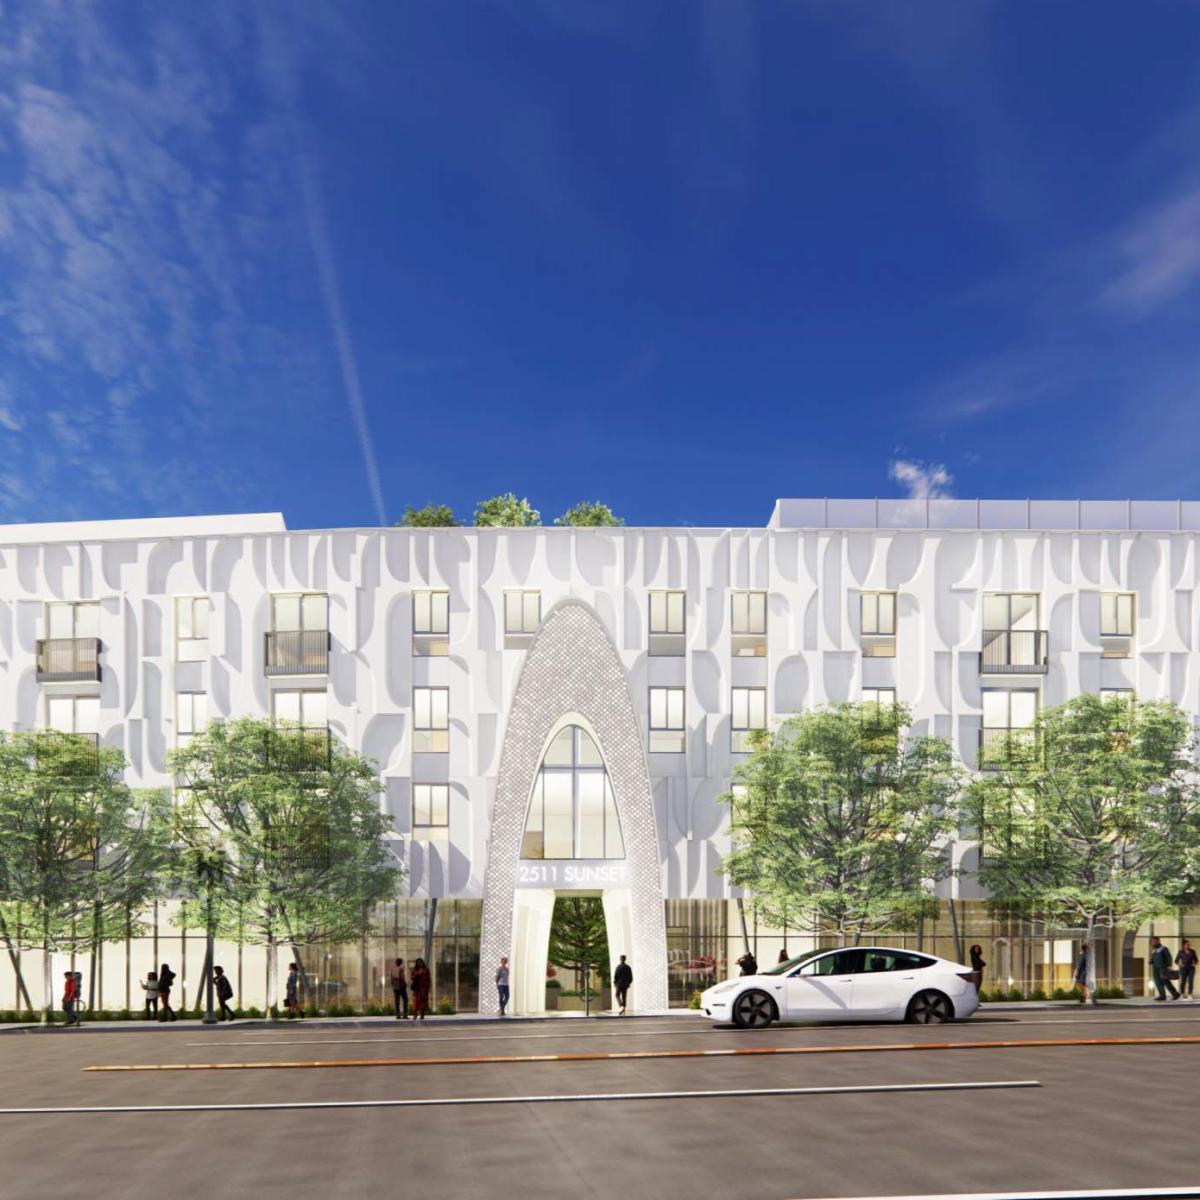 Renderings revealed for mixed-use development at 2511 Sunset 